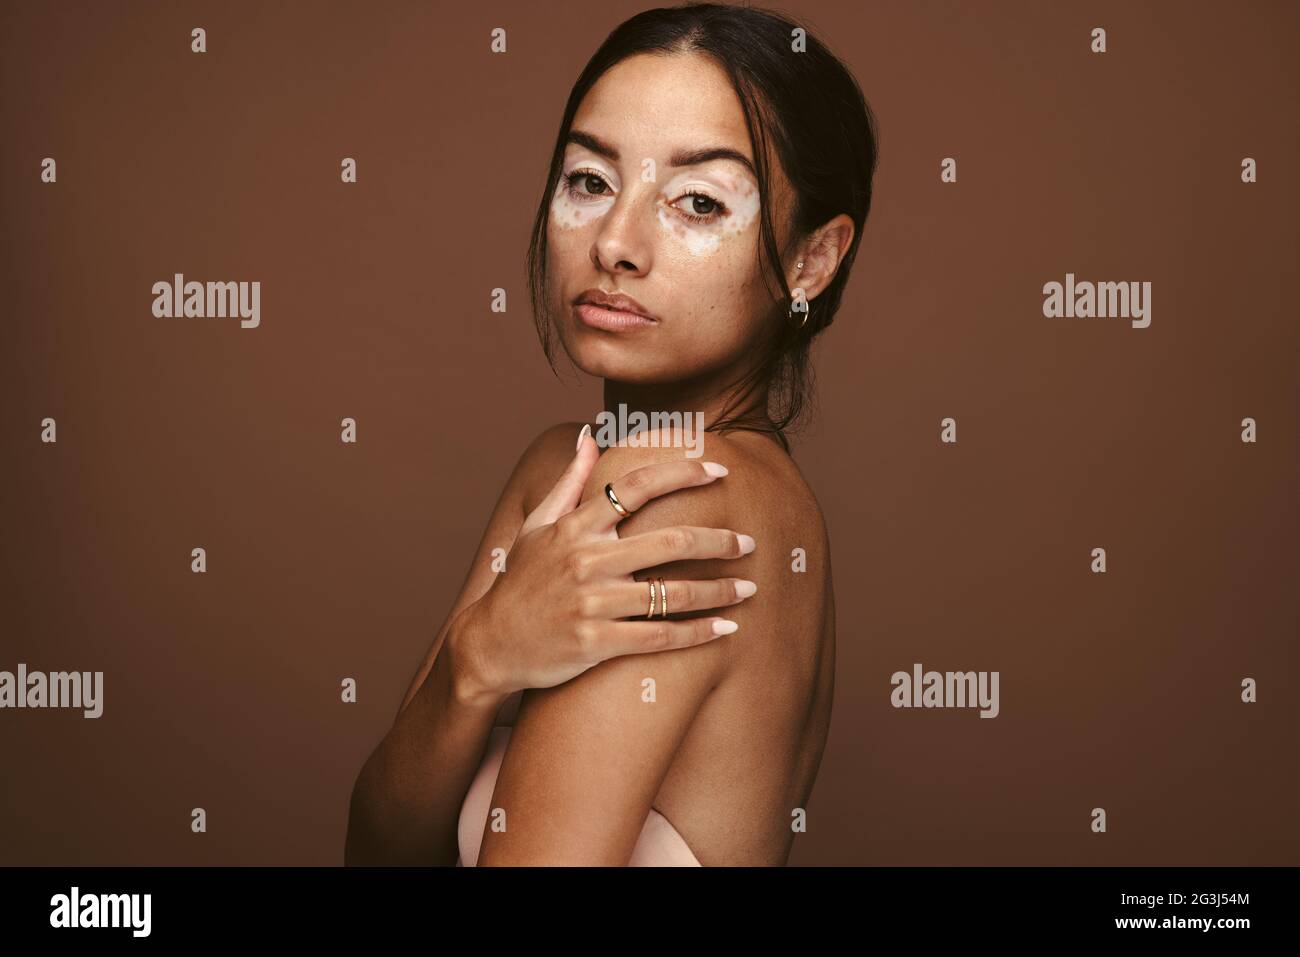 Side view portrait of woman with vitiligo. Close up of woman having skin disease. Stock Photo